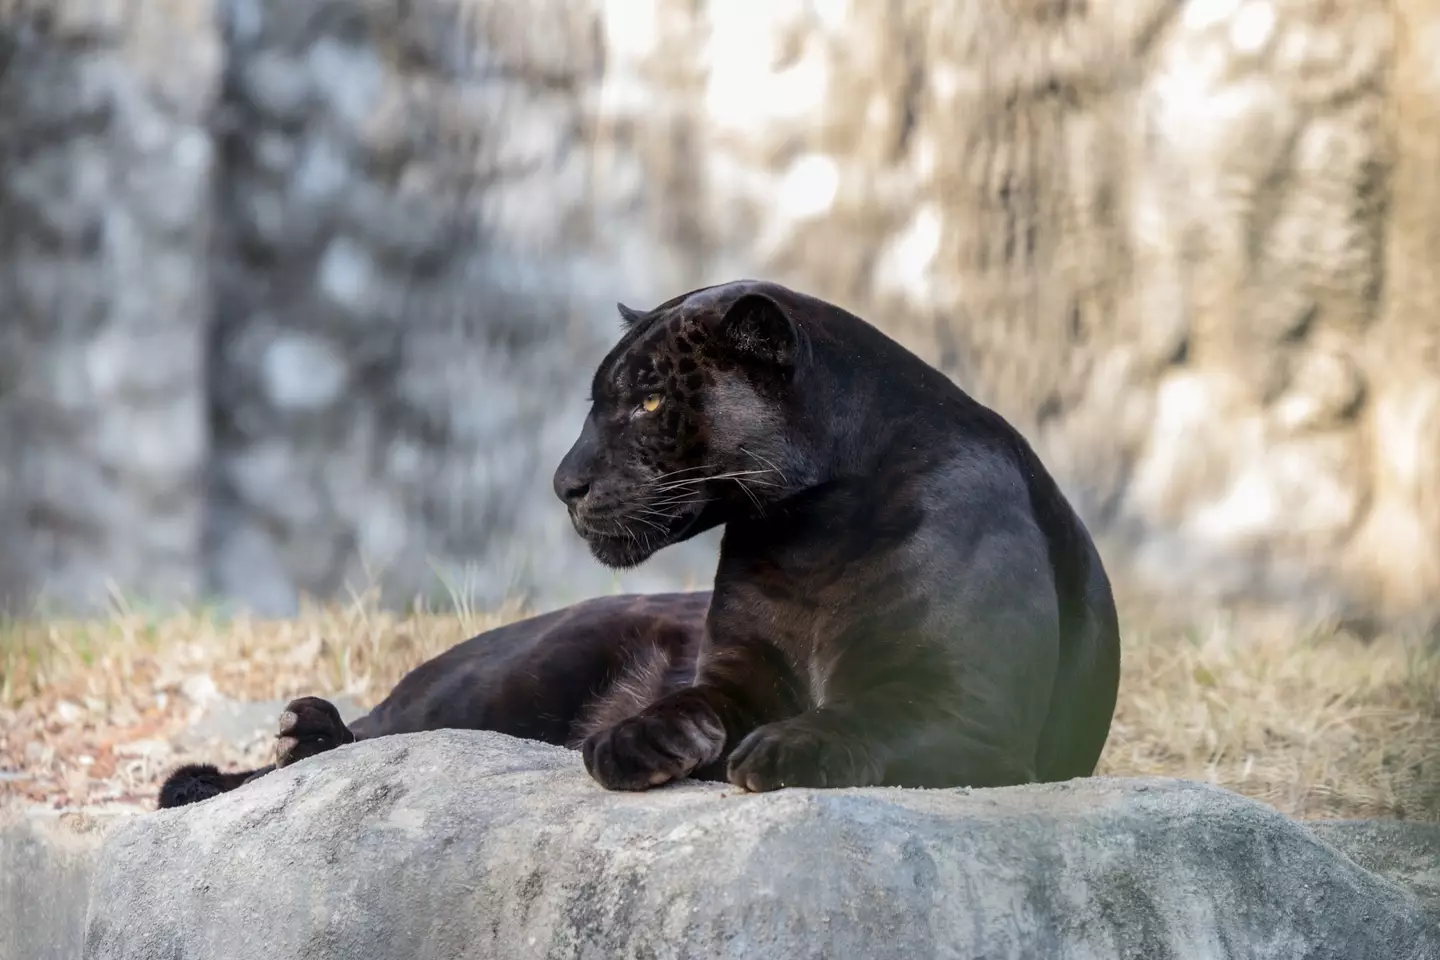 Of course, big cats like black panthers aren't native to the UK.